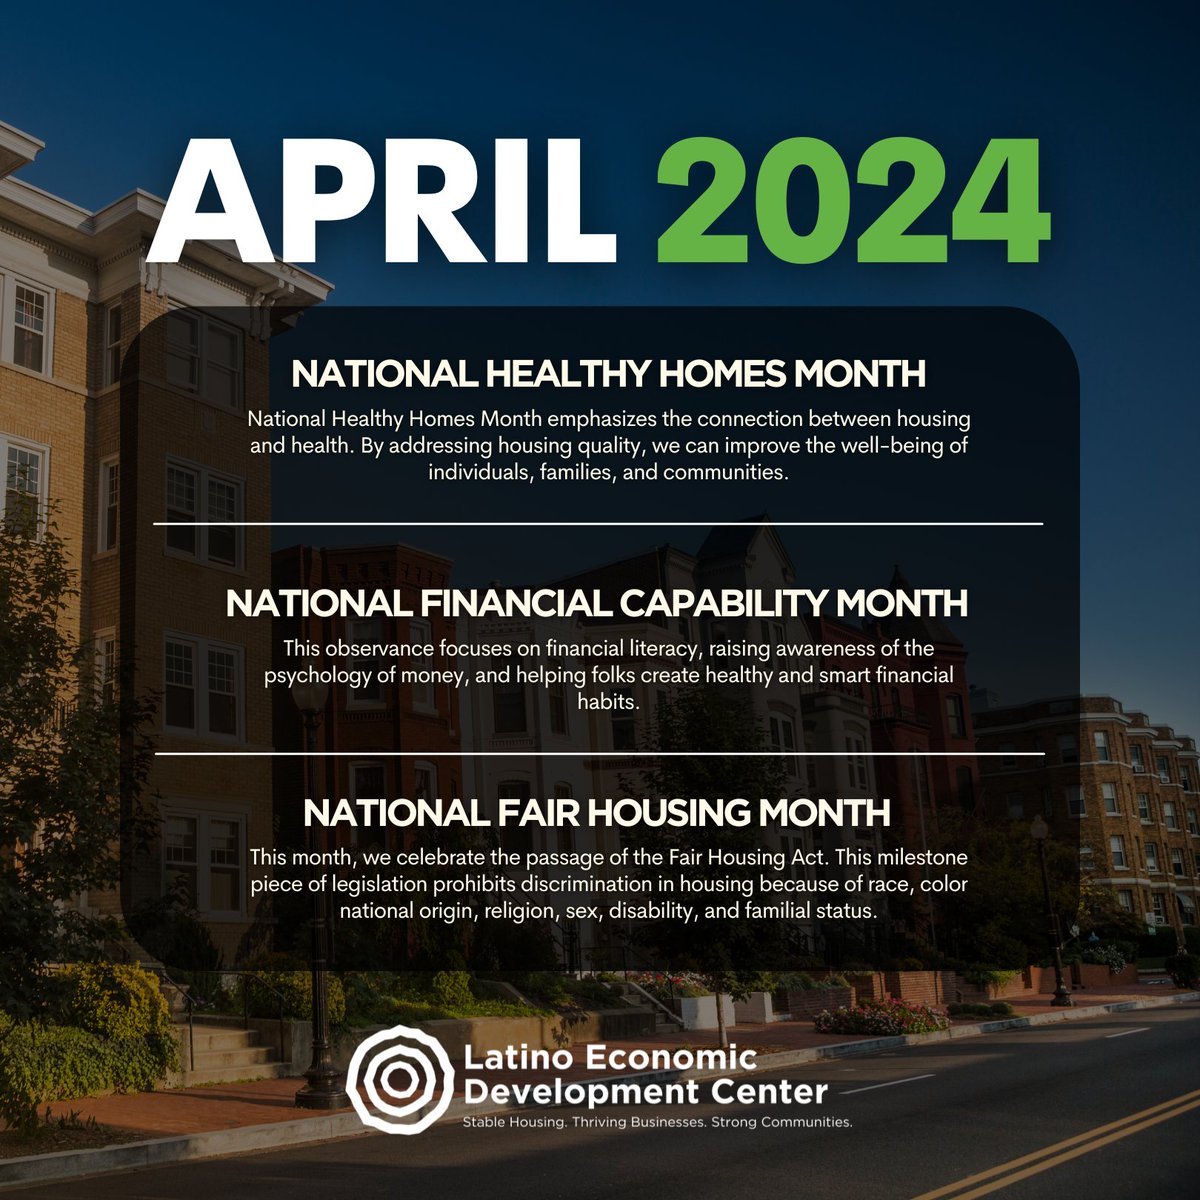 🏡 Celebrating three months of empowerment! April marks National Healthy Homes, Financial Capability, and Fair Housing Month. Throughout the month, stay tuned as we share valuable information to empower you!💰

#NHHM24 #FinancialCapability #FinancialLiteracy #FairHousing